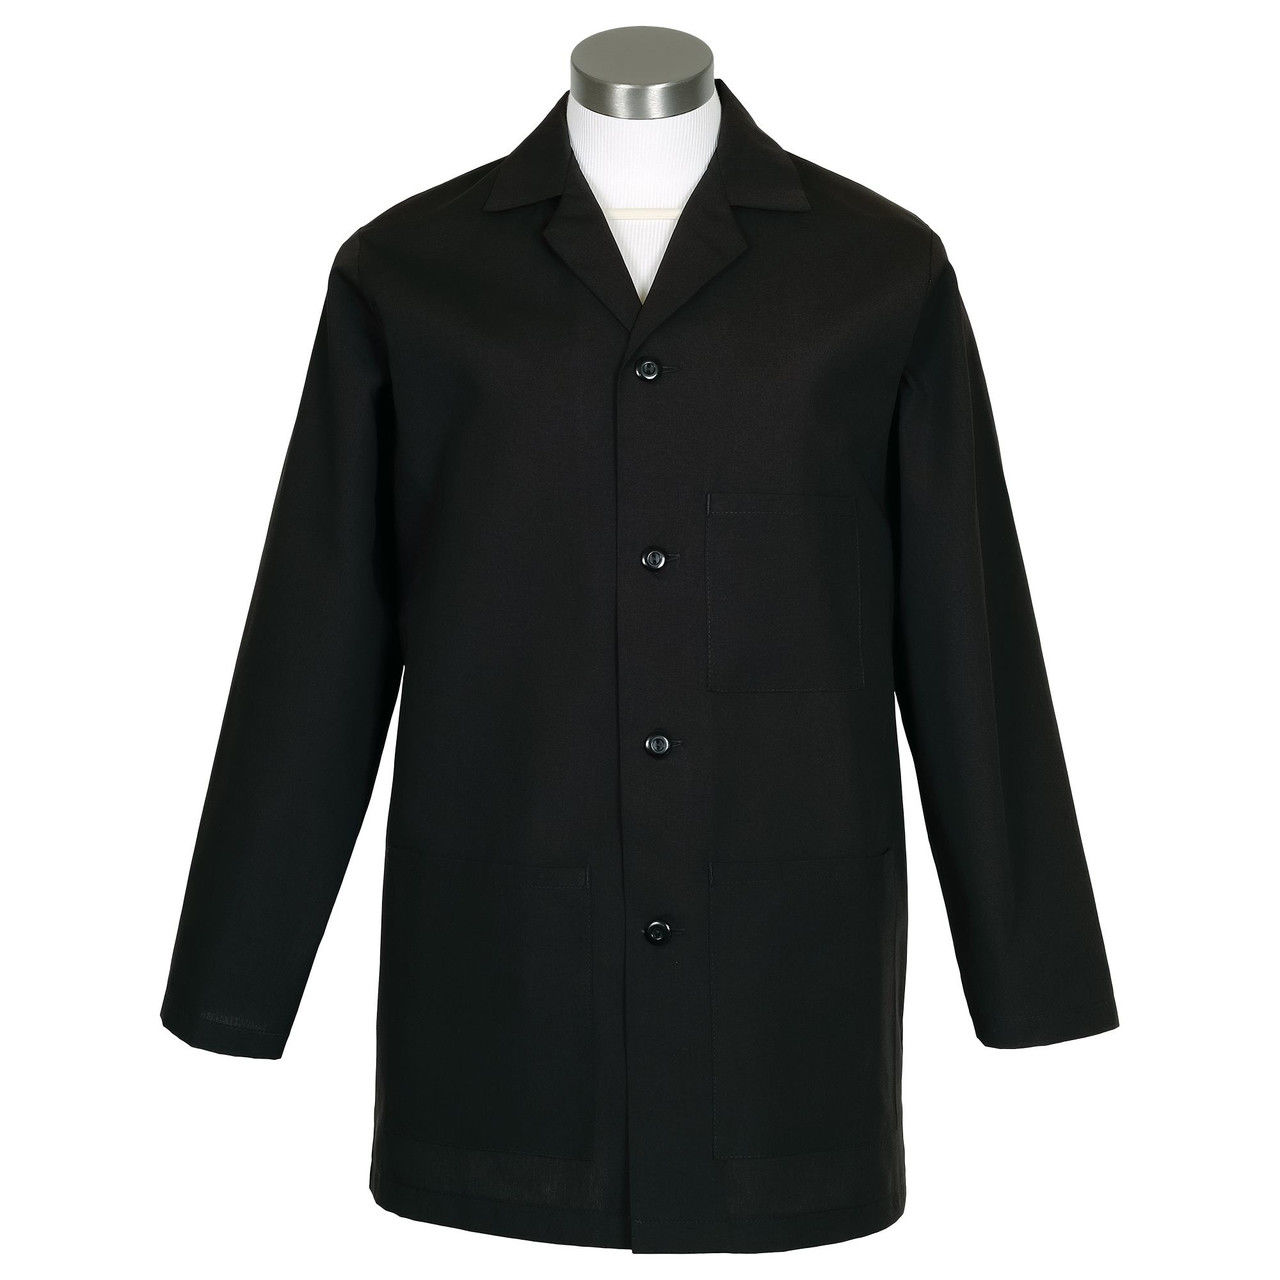 What is the fabric composition of the Black Male Counter Coat?